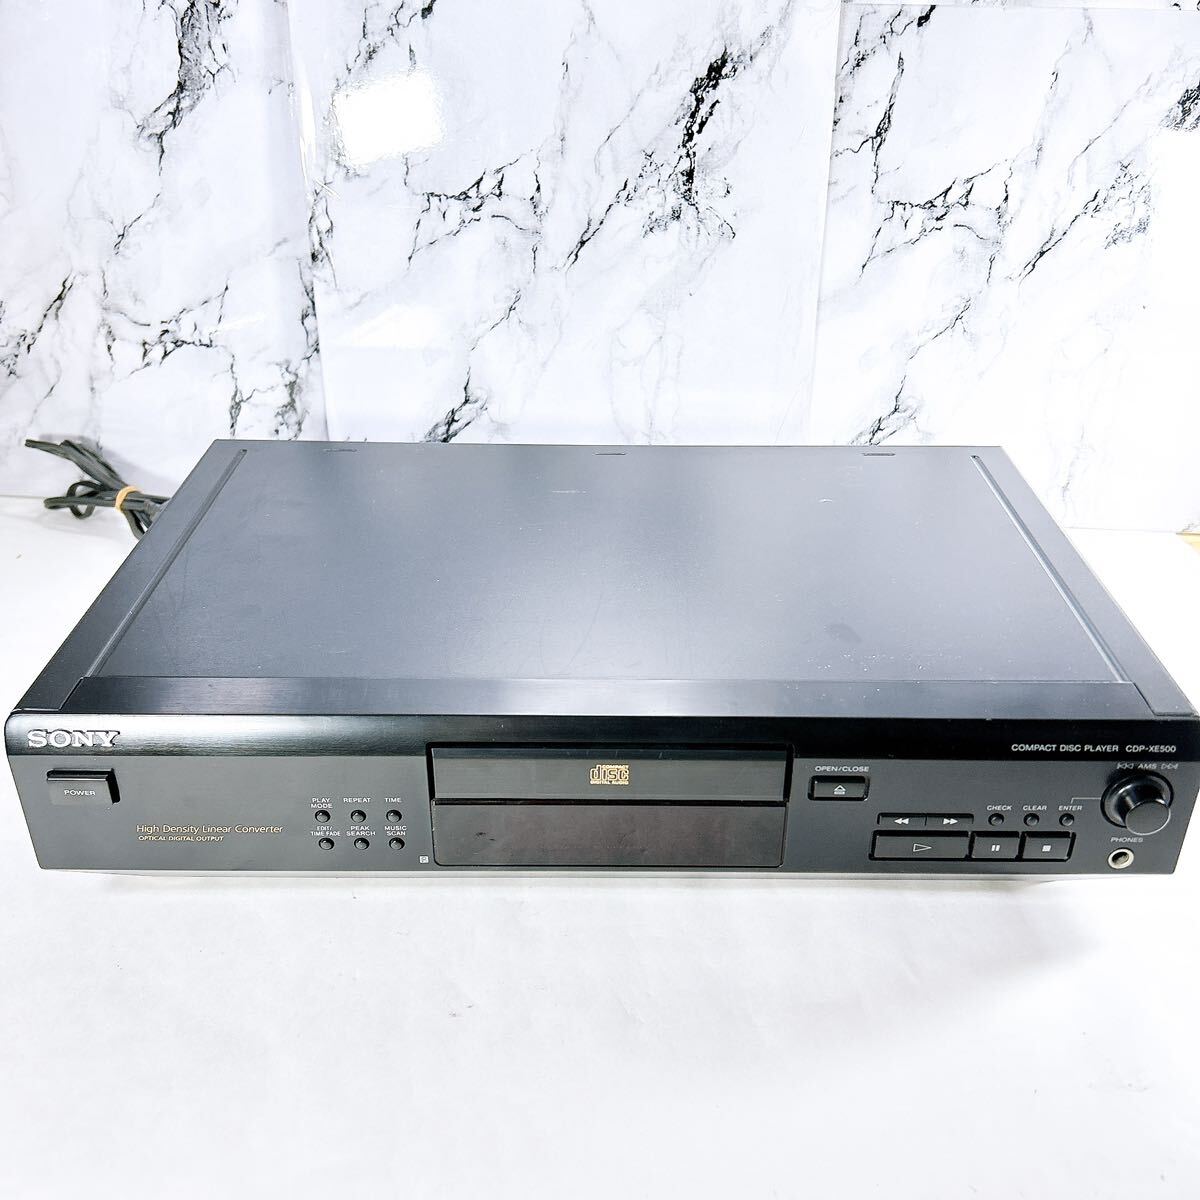 * sound out has confirmed * SONY| Sony CD player CDP-XE500